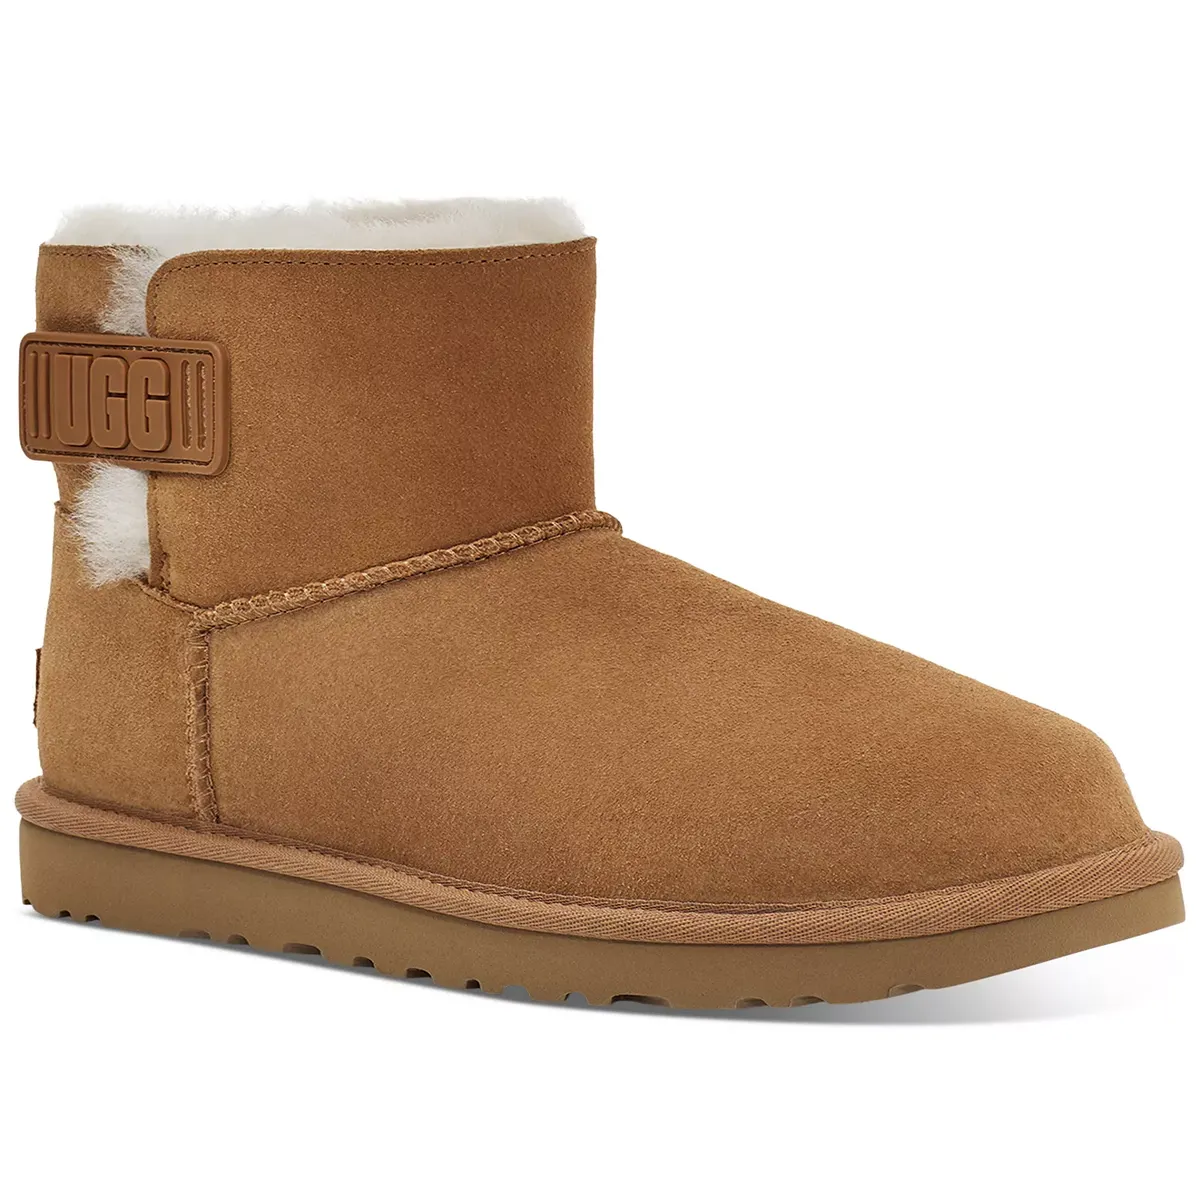 Tan short boot with a plush white lining and a branded logo on the side.